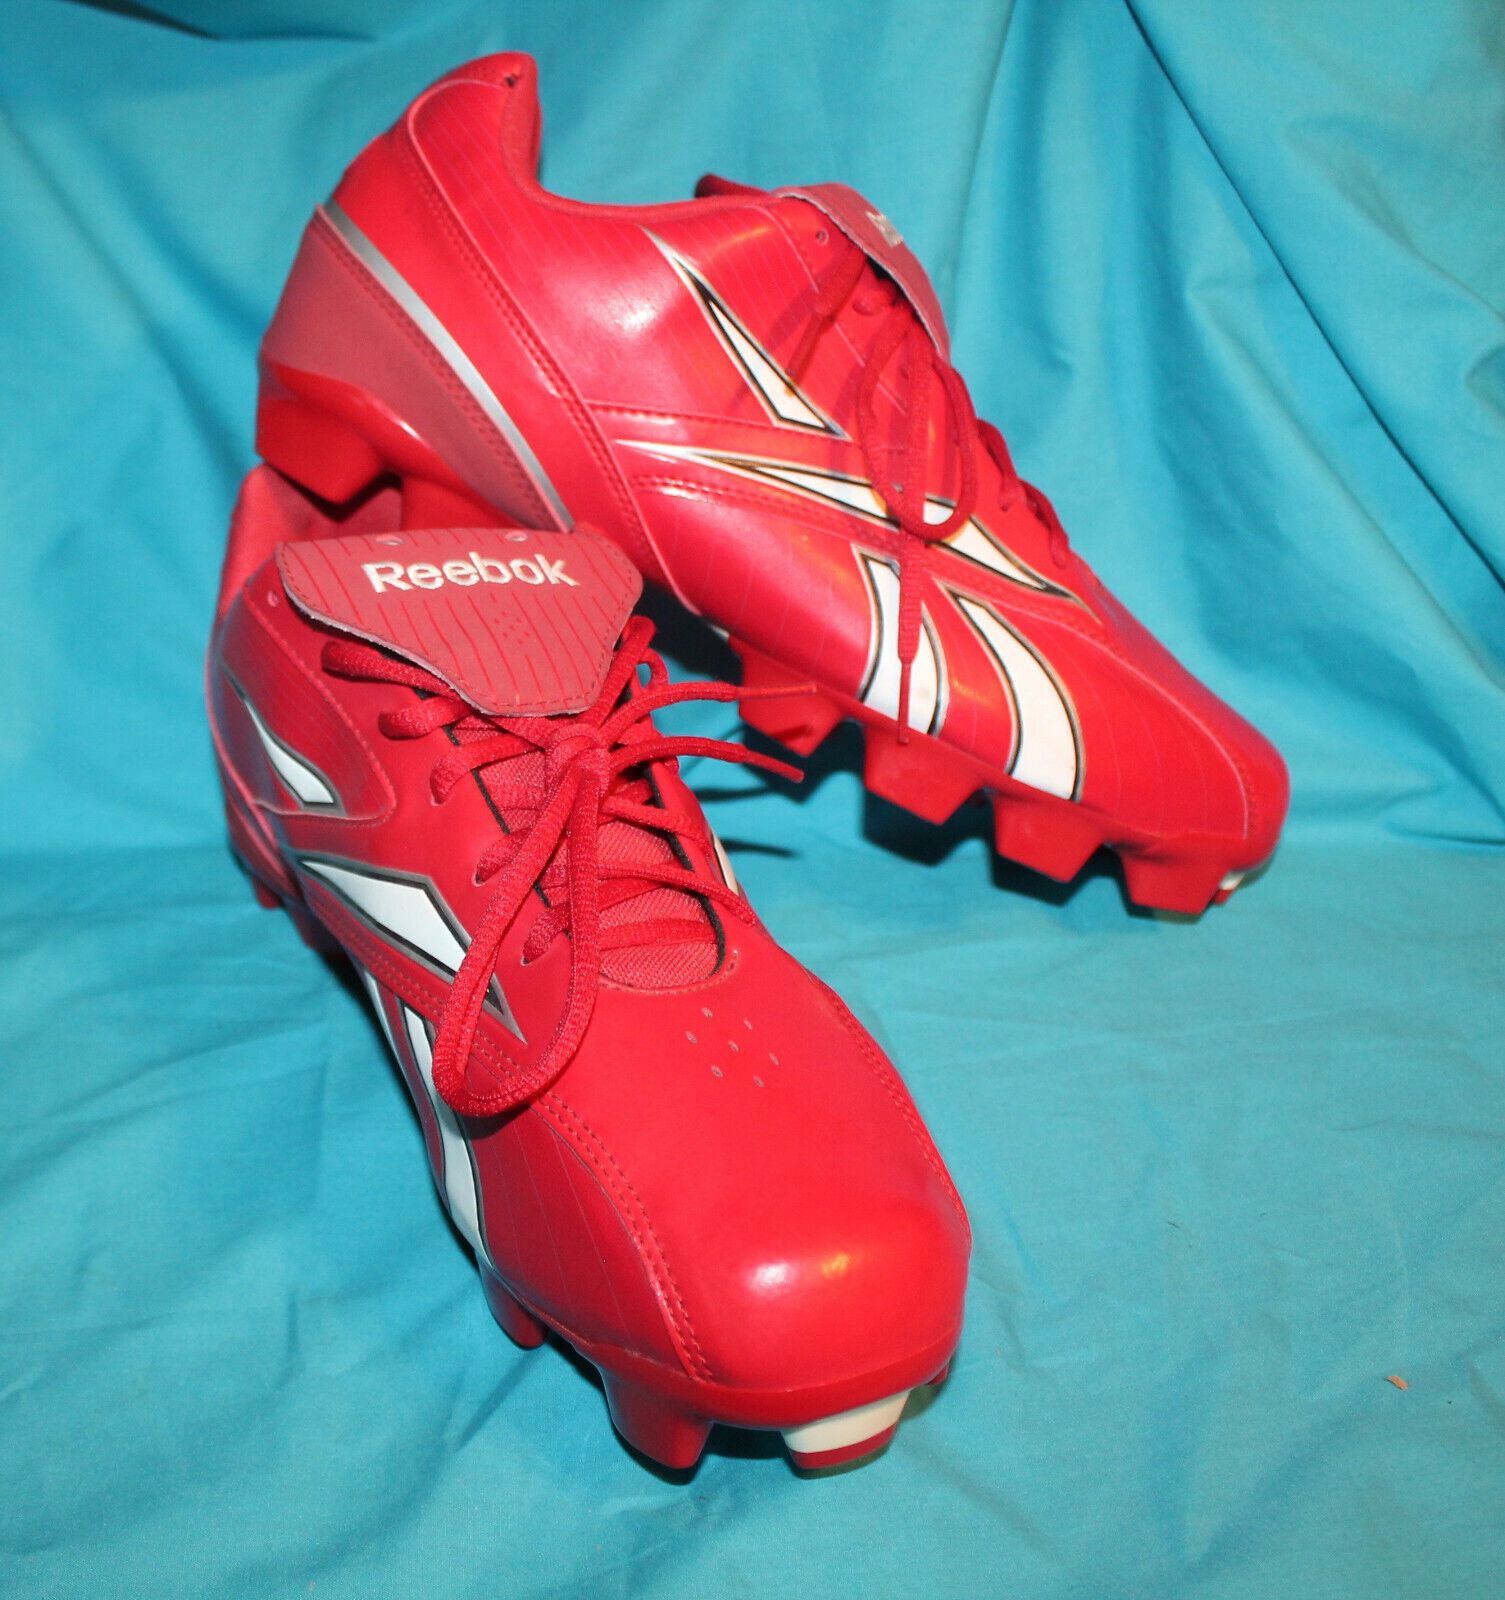 REEBOK Mens Cleats Size 12.5 Baseball Softball Play Dry Authentic Hardlink Red - $44.40